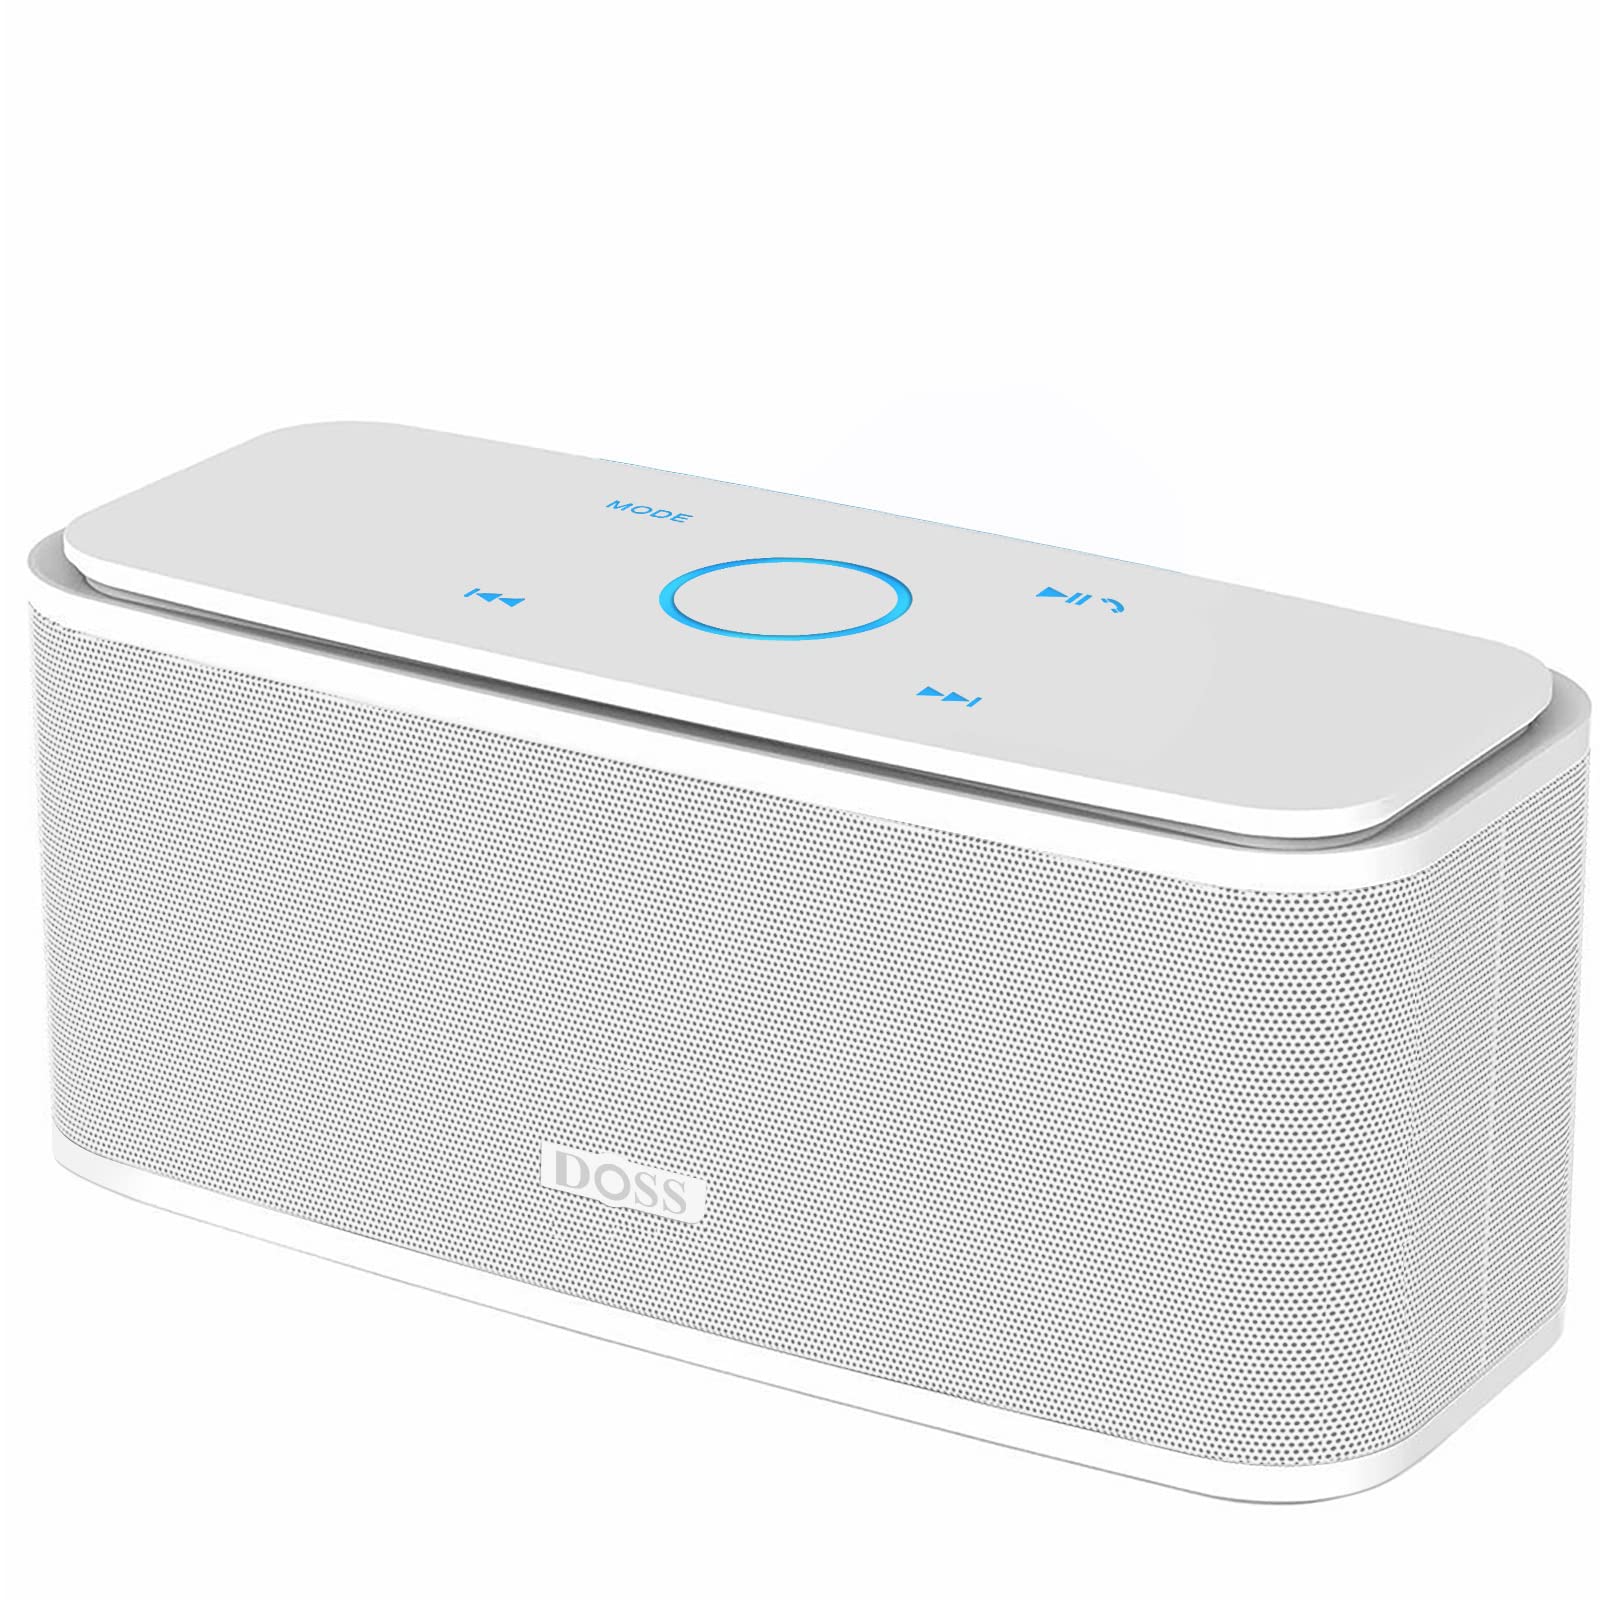 DOSS Bluetooth Speaker, SoundBox Touch Portable Wireless Speaker with 12W HD Sound and Bass, IPX5 Water-Resistant, 20H Playtime, Touch Control, Handsfree, Speaker for Home, Outdoor, Travel-White